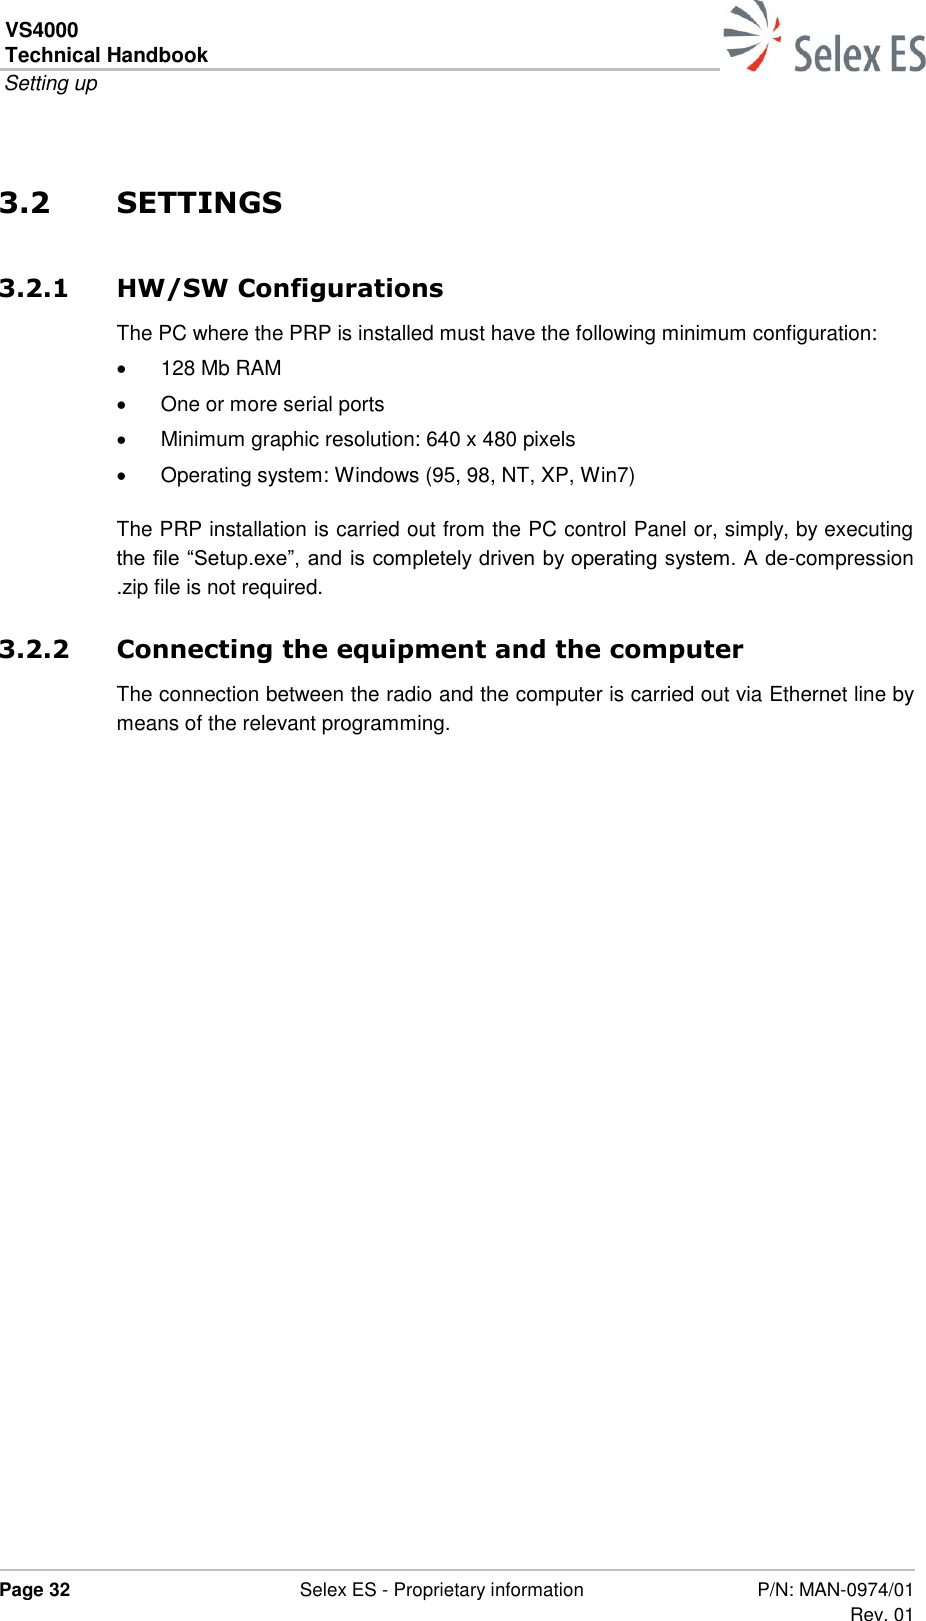 VS4000 Technical Handbook  Setting up  Page 32  Selex ES - Proprietary information P/N: MAN-0974/01 Rev. 01  3.2 SETTINGS 3.2.1 HW/SW Configurations The PC where the PRP is installed must have the following minimum configuration:  128 Mb RAM   One or more serial ports   Minimum graphic resolution: 640 x 480 pixels   Operating system: Windows (95, 98, NT, XP, Win7) The PRP installation is carried out from the PC control Panel or, simply, by executing the file “Setup.exe”, and is completely driven by operating system. A de-compression .zip file is not required. 3.2.2 Connecting the equipment and the computer The connection between the radio and the computer is carried out via Ethernet line by means of the relevant programming.  